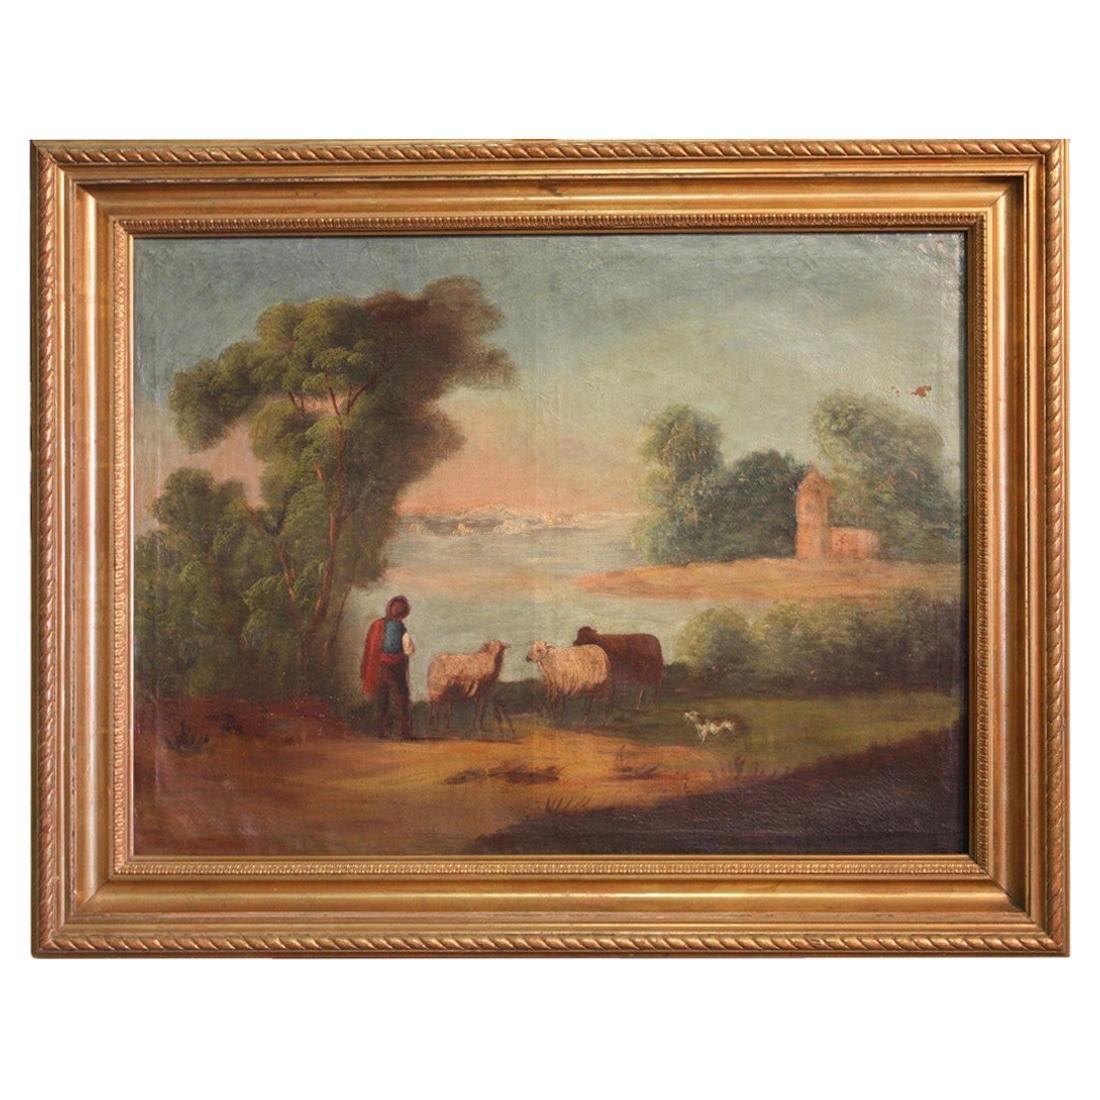 Antique Spanish Landscape Painting with Shepherd from the 19th Century For Sale